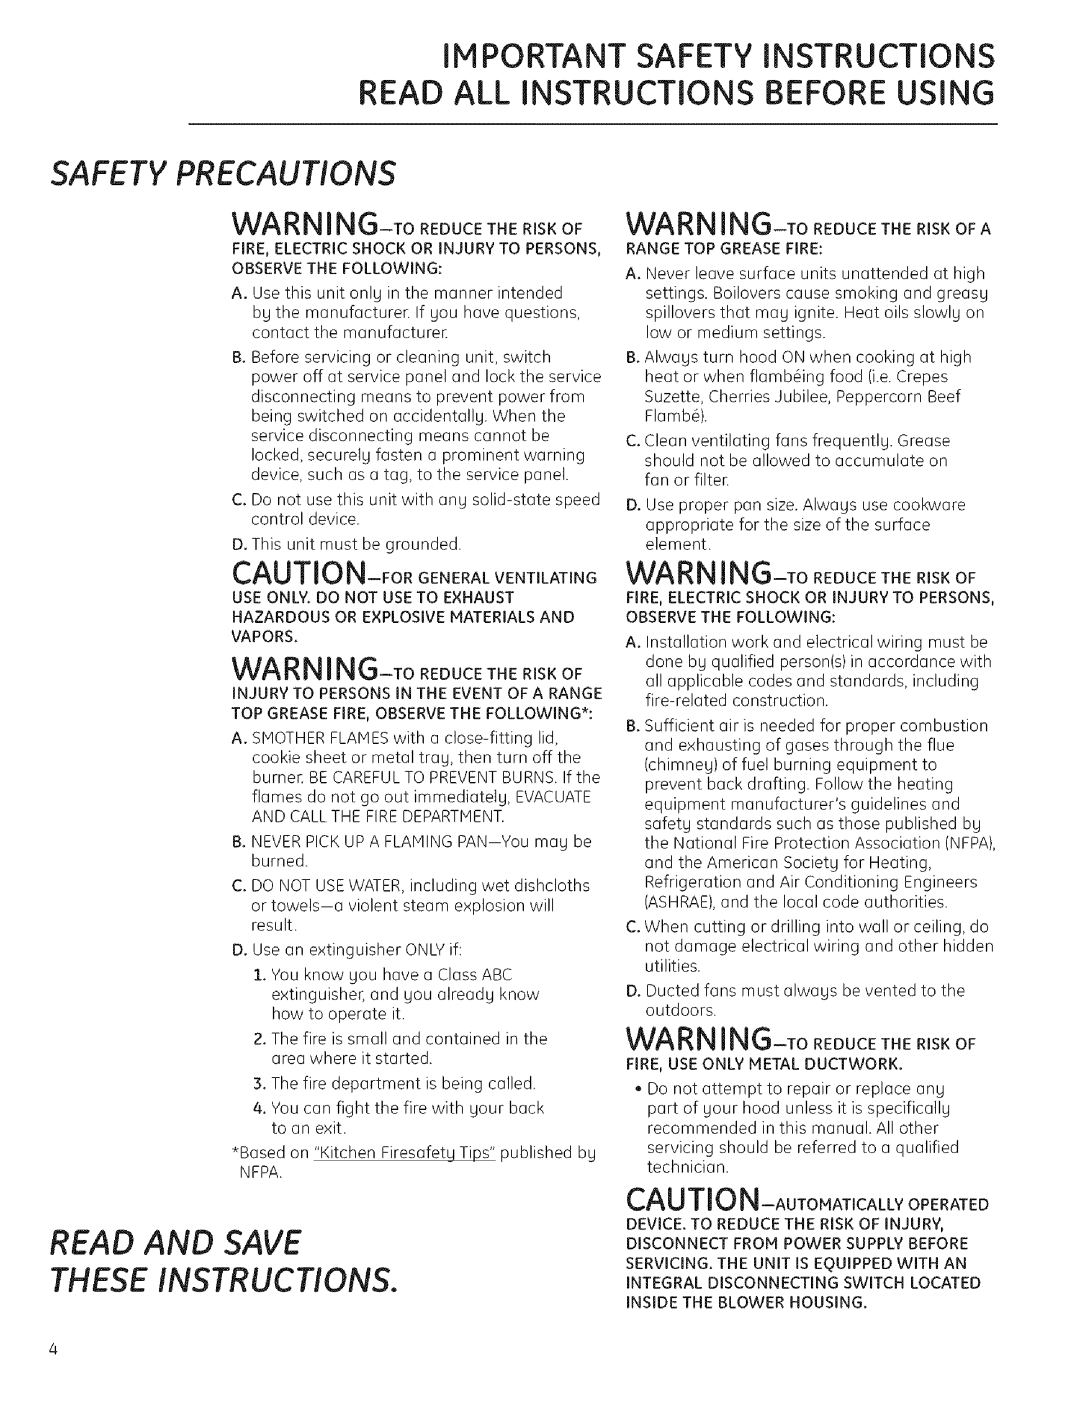 GE ZV925 Safety Precautions, Read And Save These Instructions, Caution--Automaticallyoperated, WARNING-To REDUCETHE RISKOF 